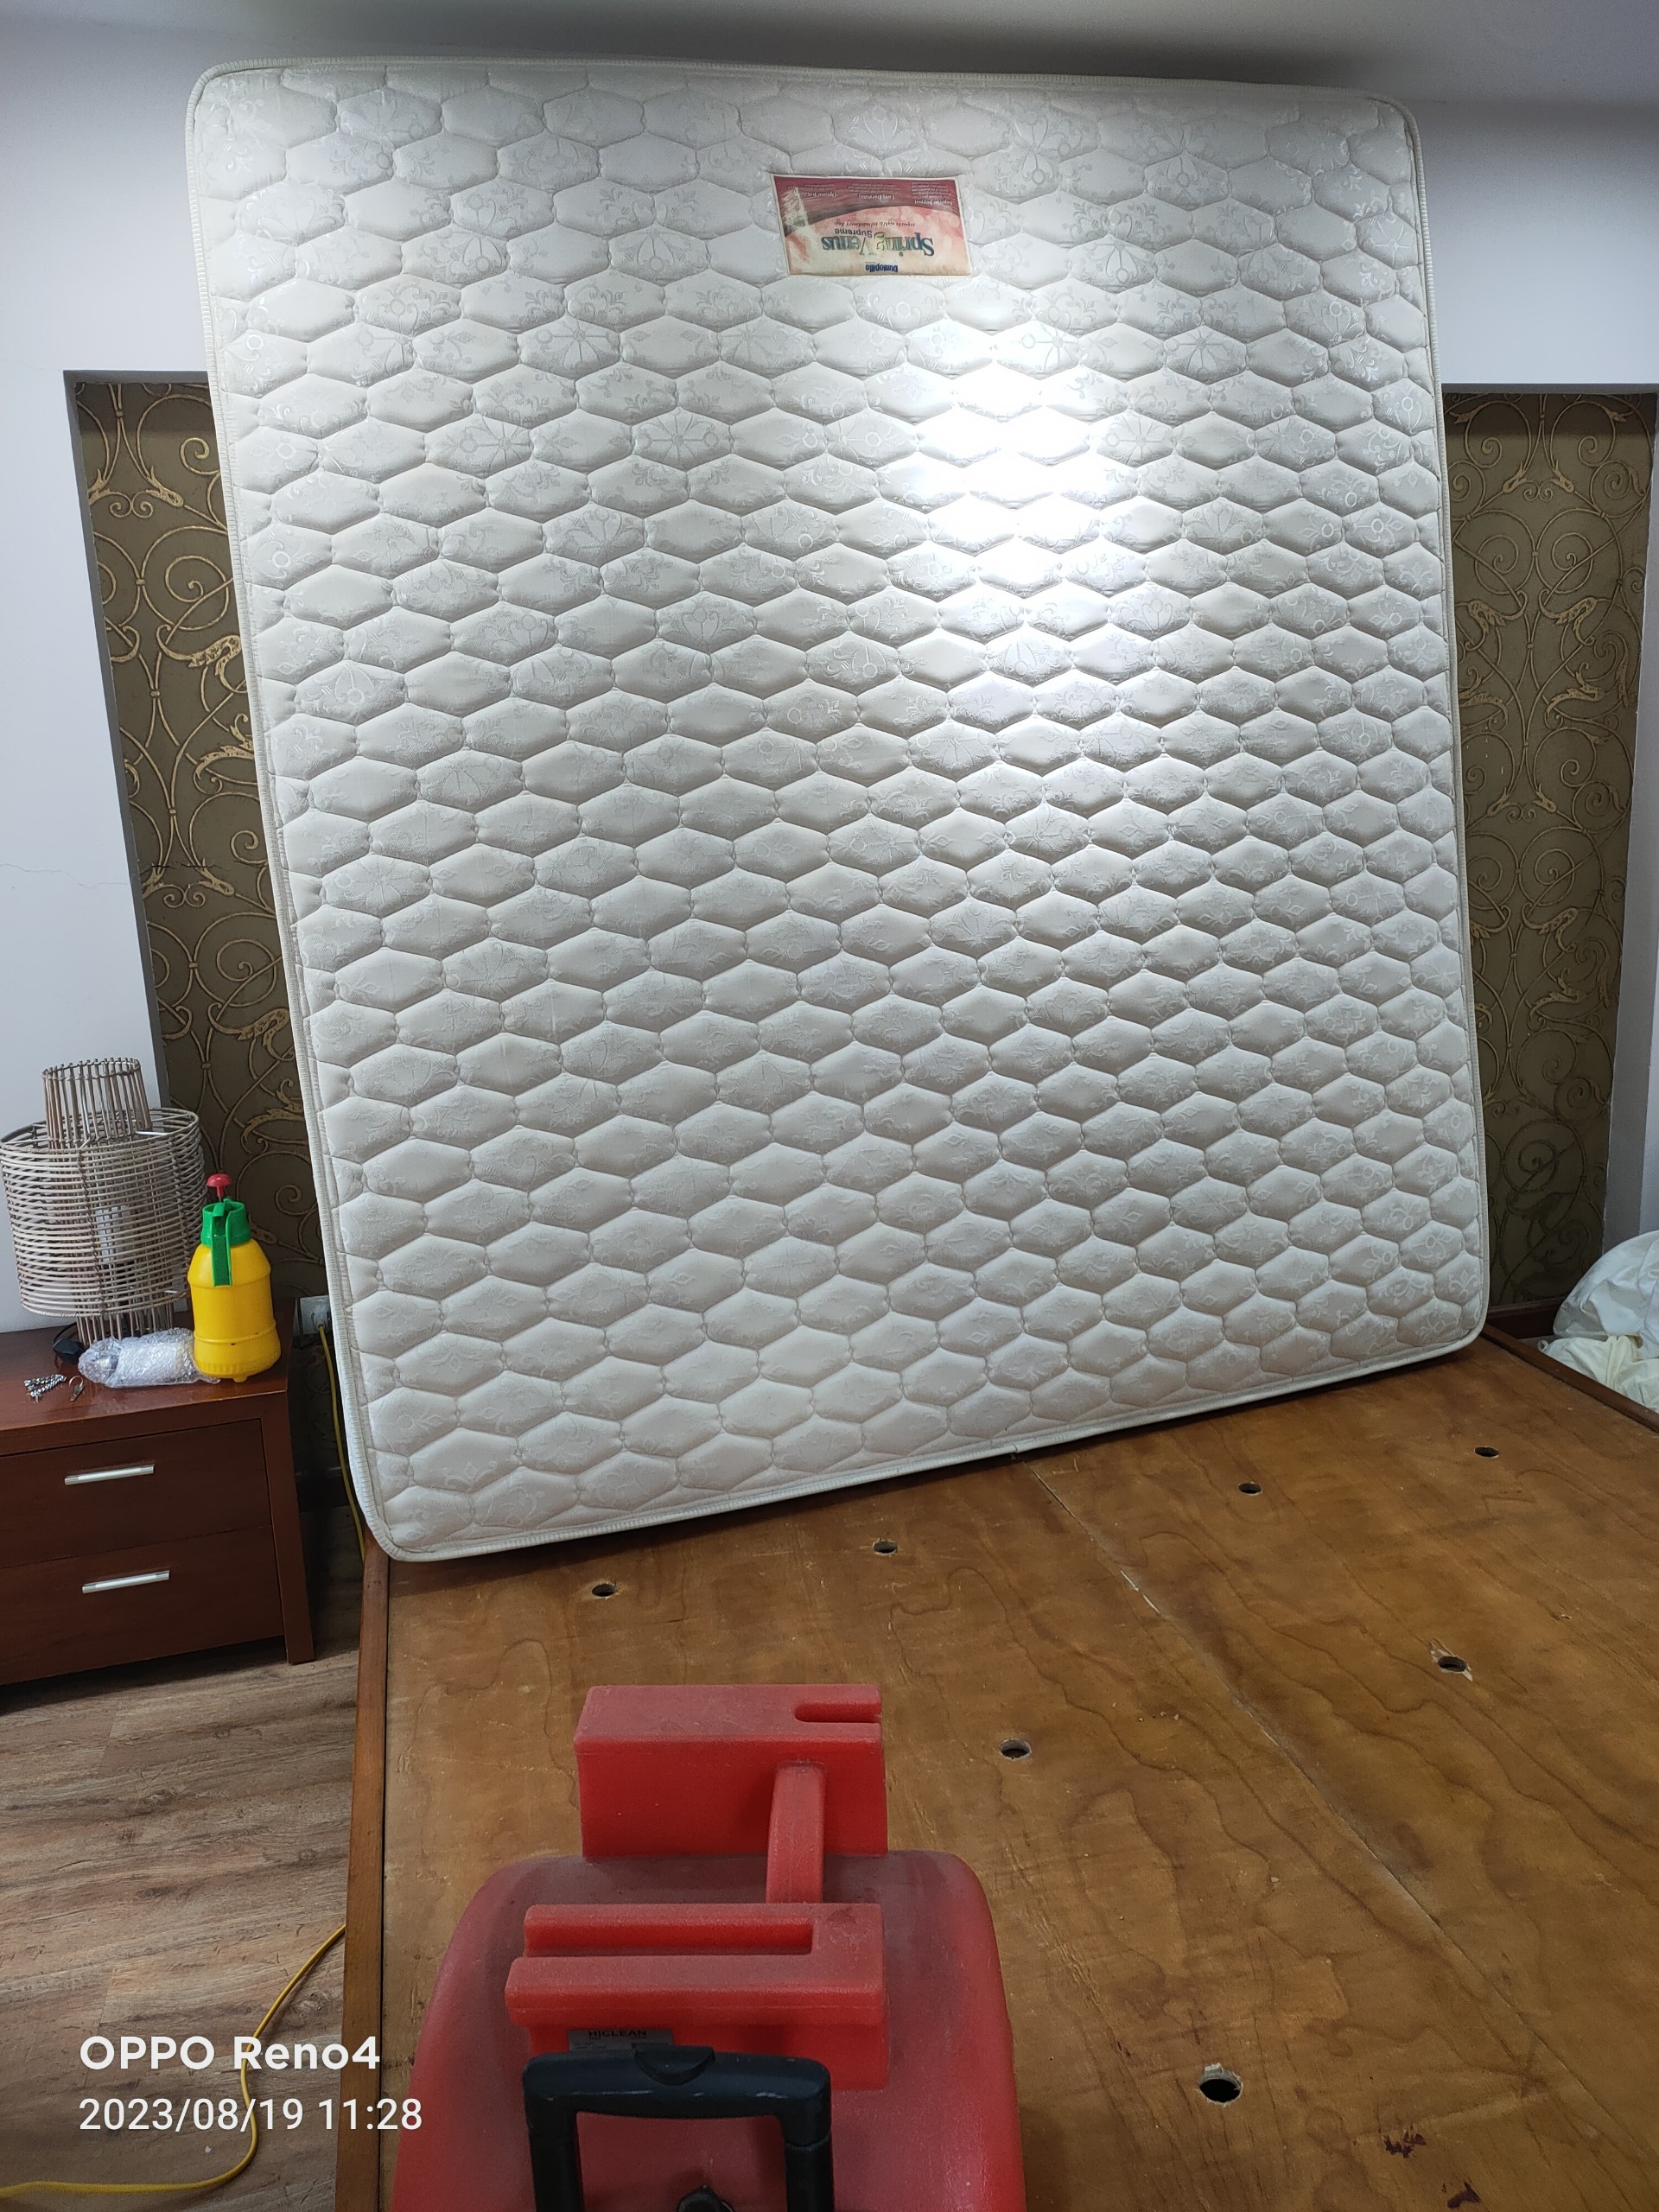 Mattress-steam-cleaning-mold removal